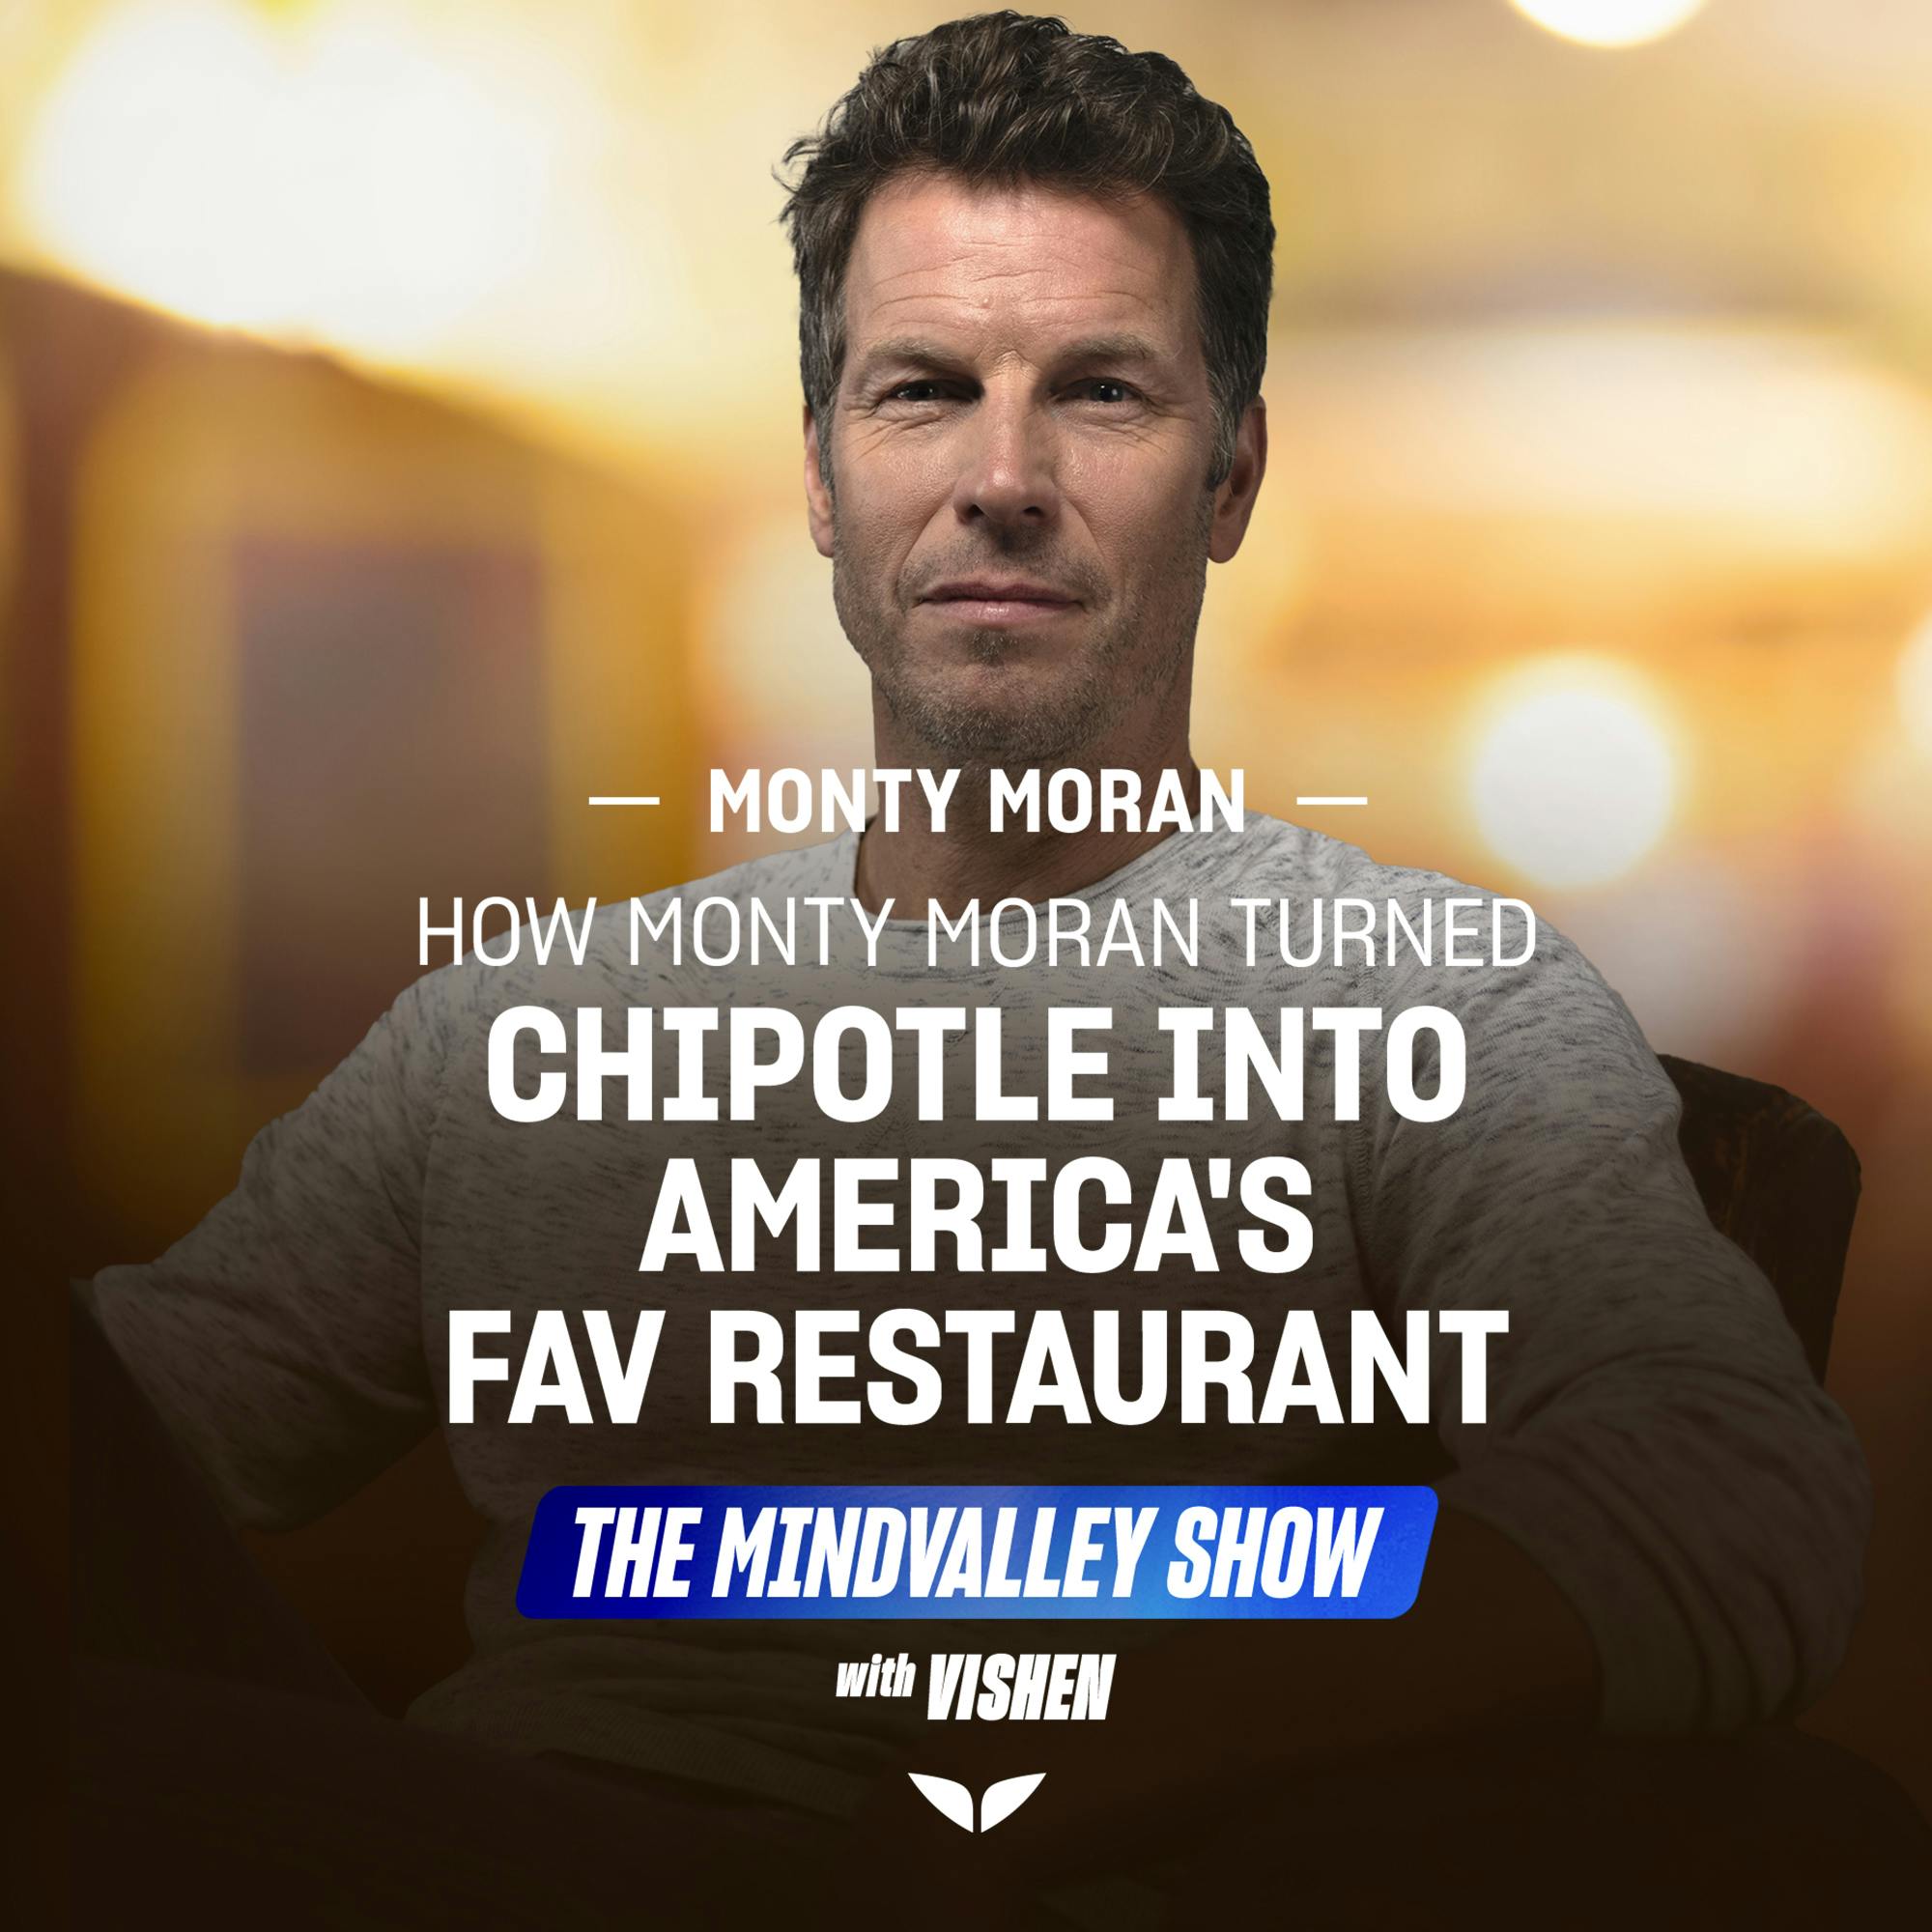 The Power of Love at Work: How Monty Moran Turned Chipotle into America's Fav Restaurant